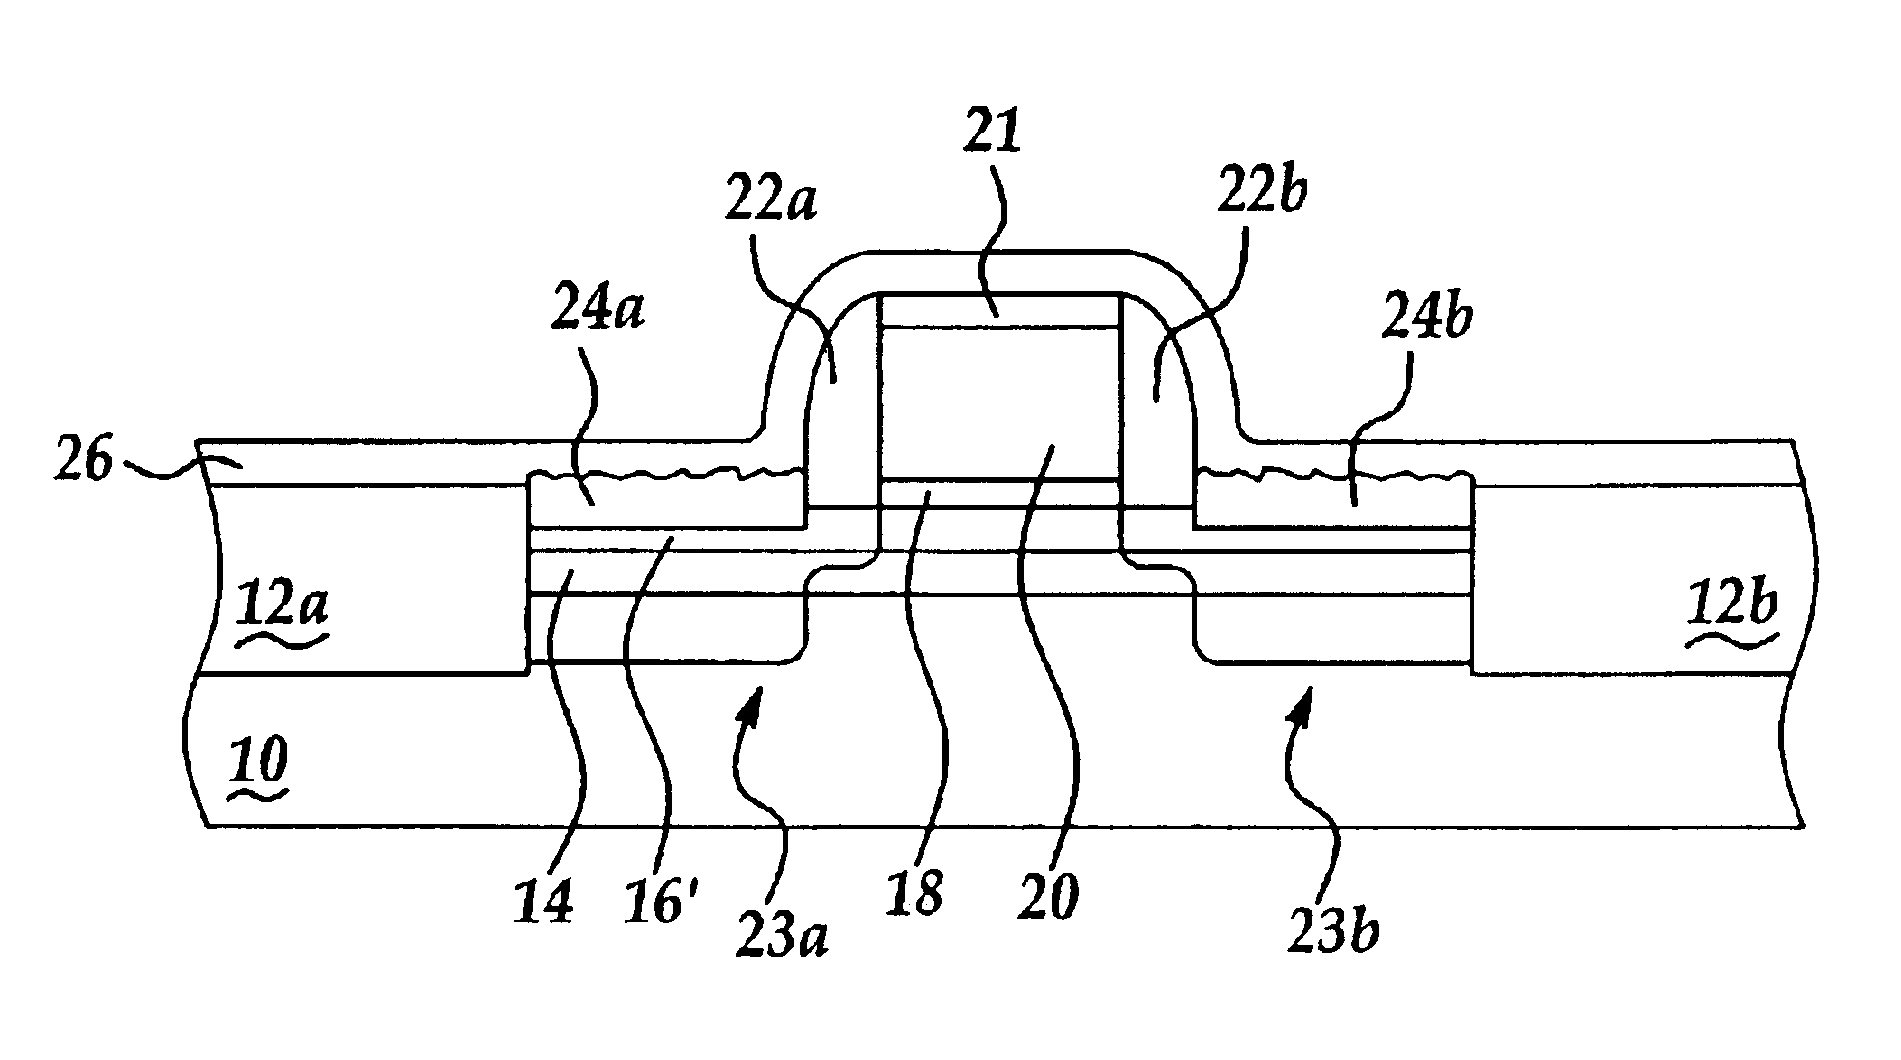 Strained silicon layer semiconductor product employing strained insulator layer